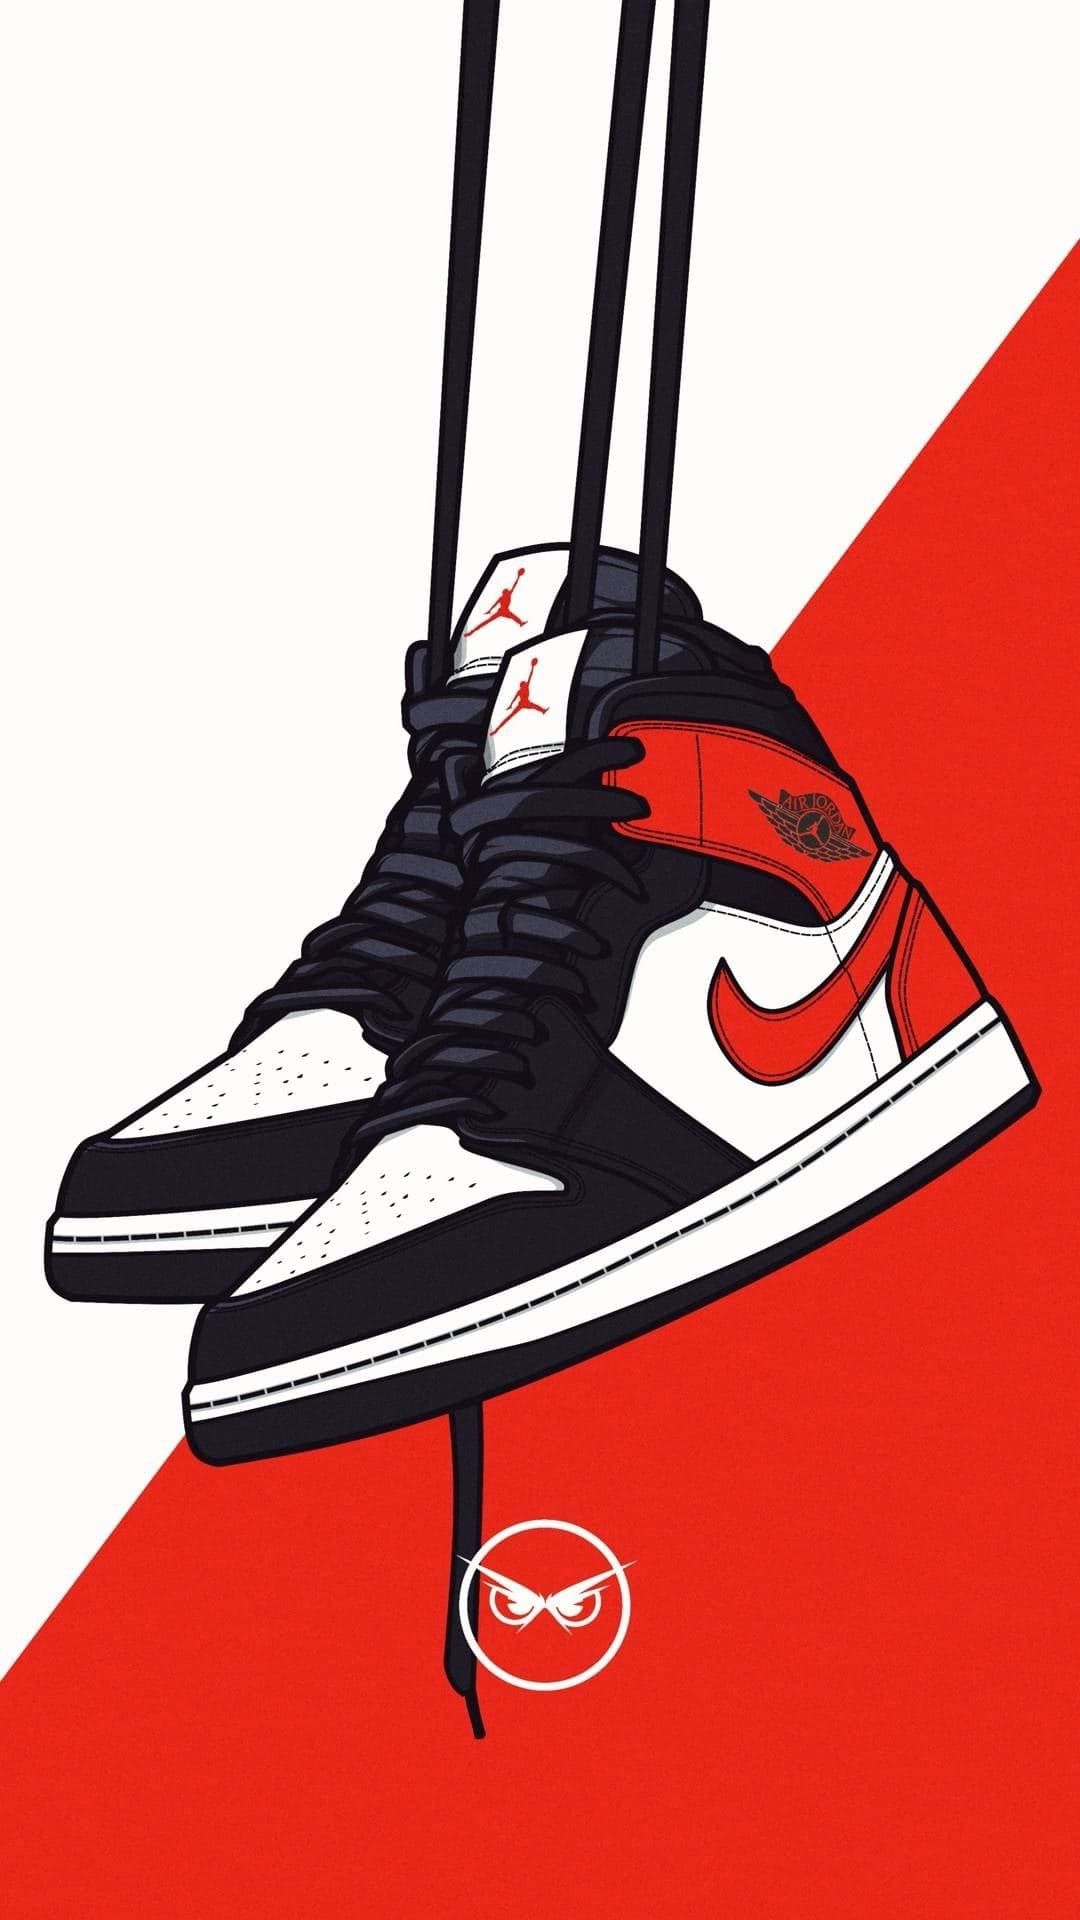 IPhone wallpaper of a pair of black and white Nike Air Jordan 1 shoes hanging by their shoelaces on a red background - Shoes